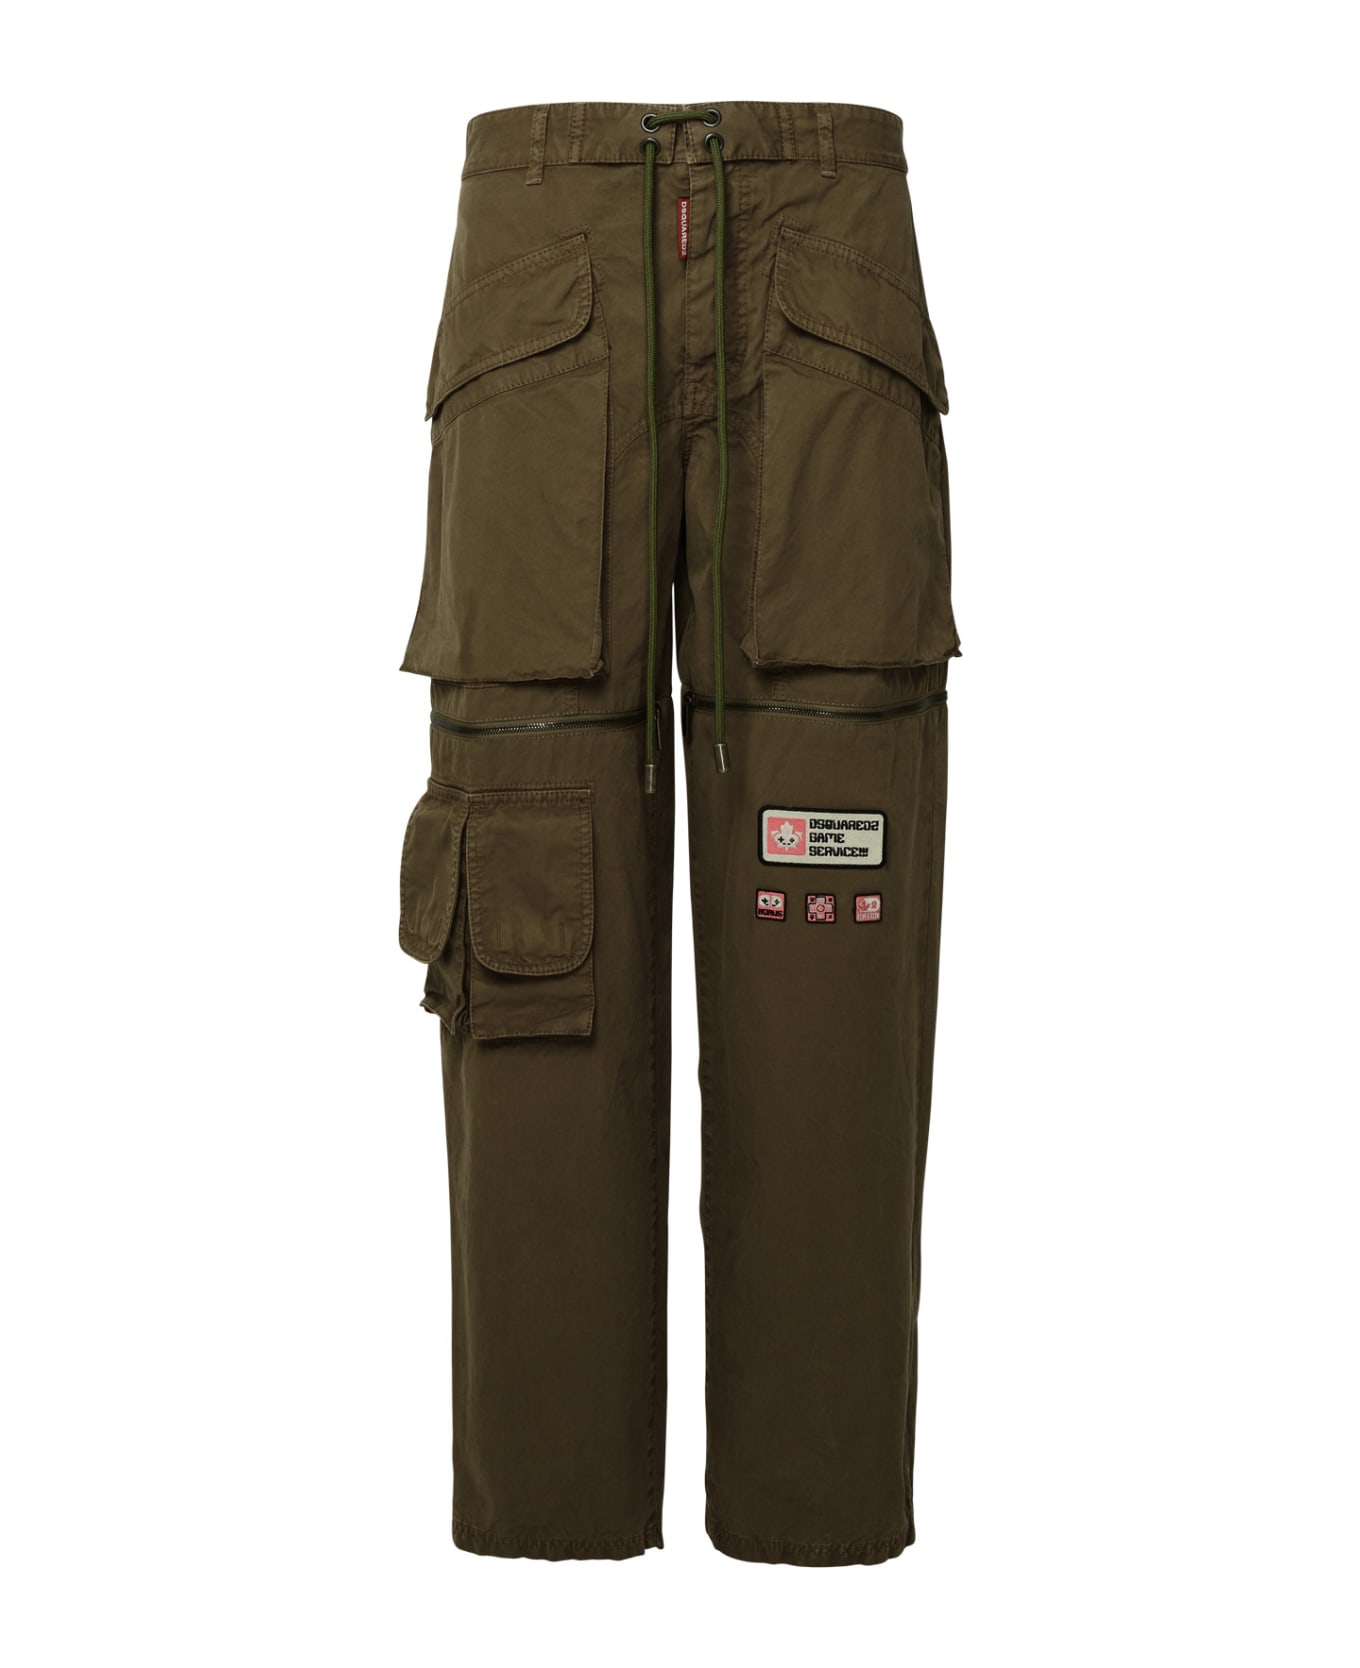 Dsquared2 Green Cotton Pants - Green ボトムス